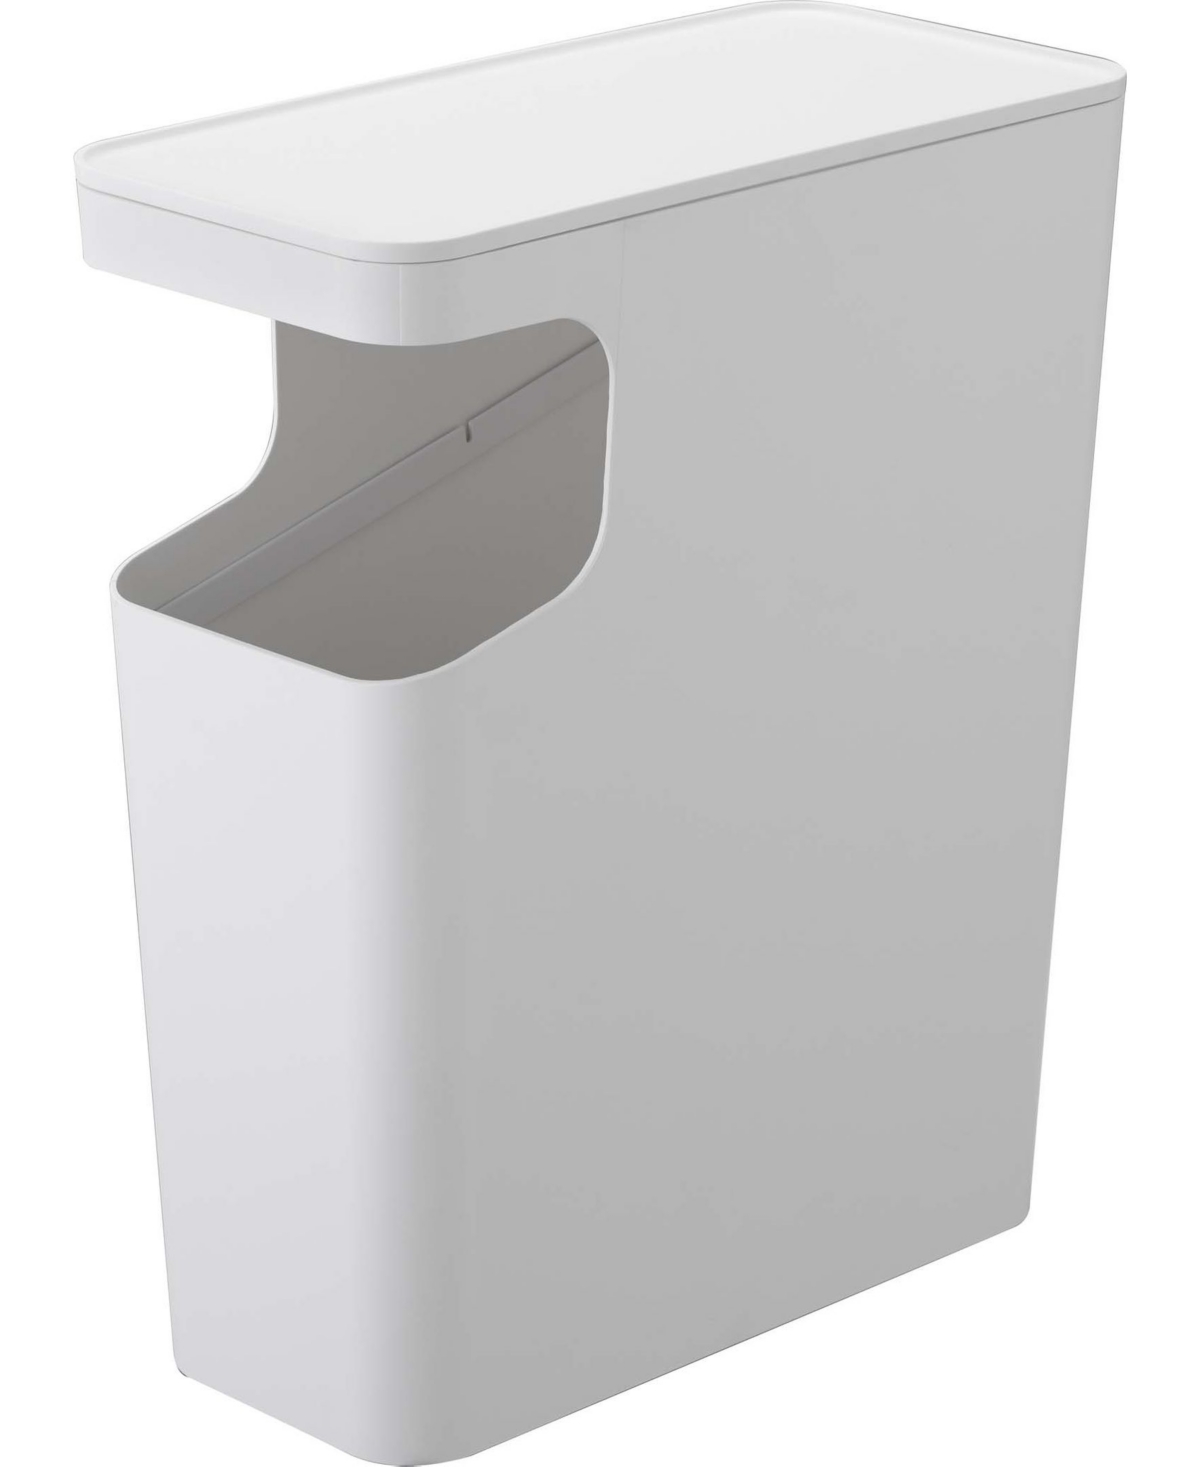 Home Tower Side Table Trash Can - White